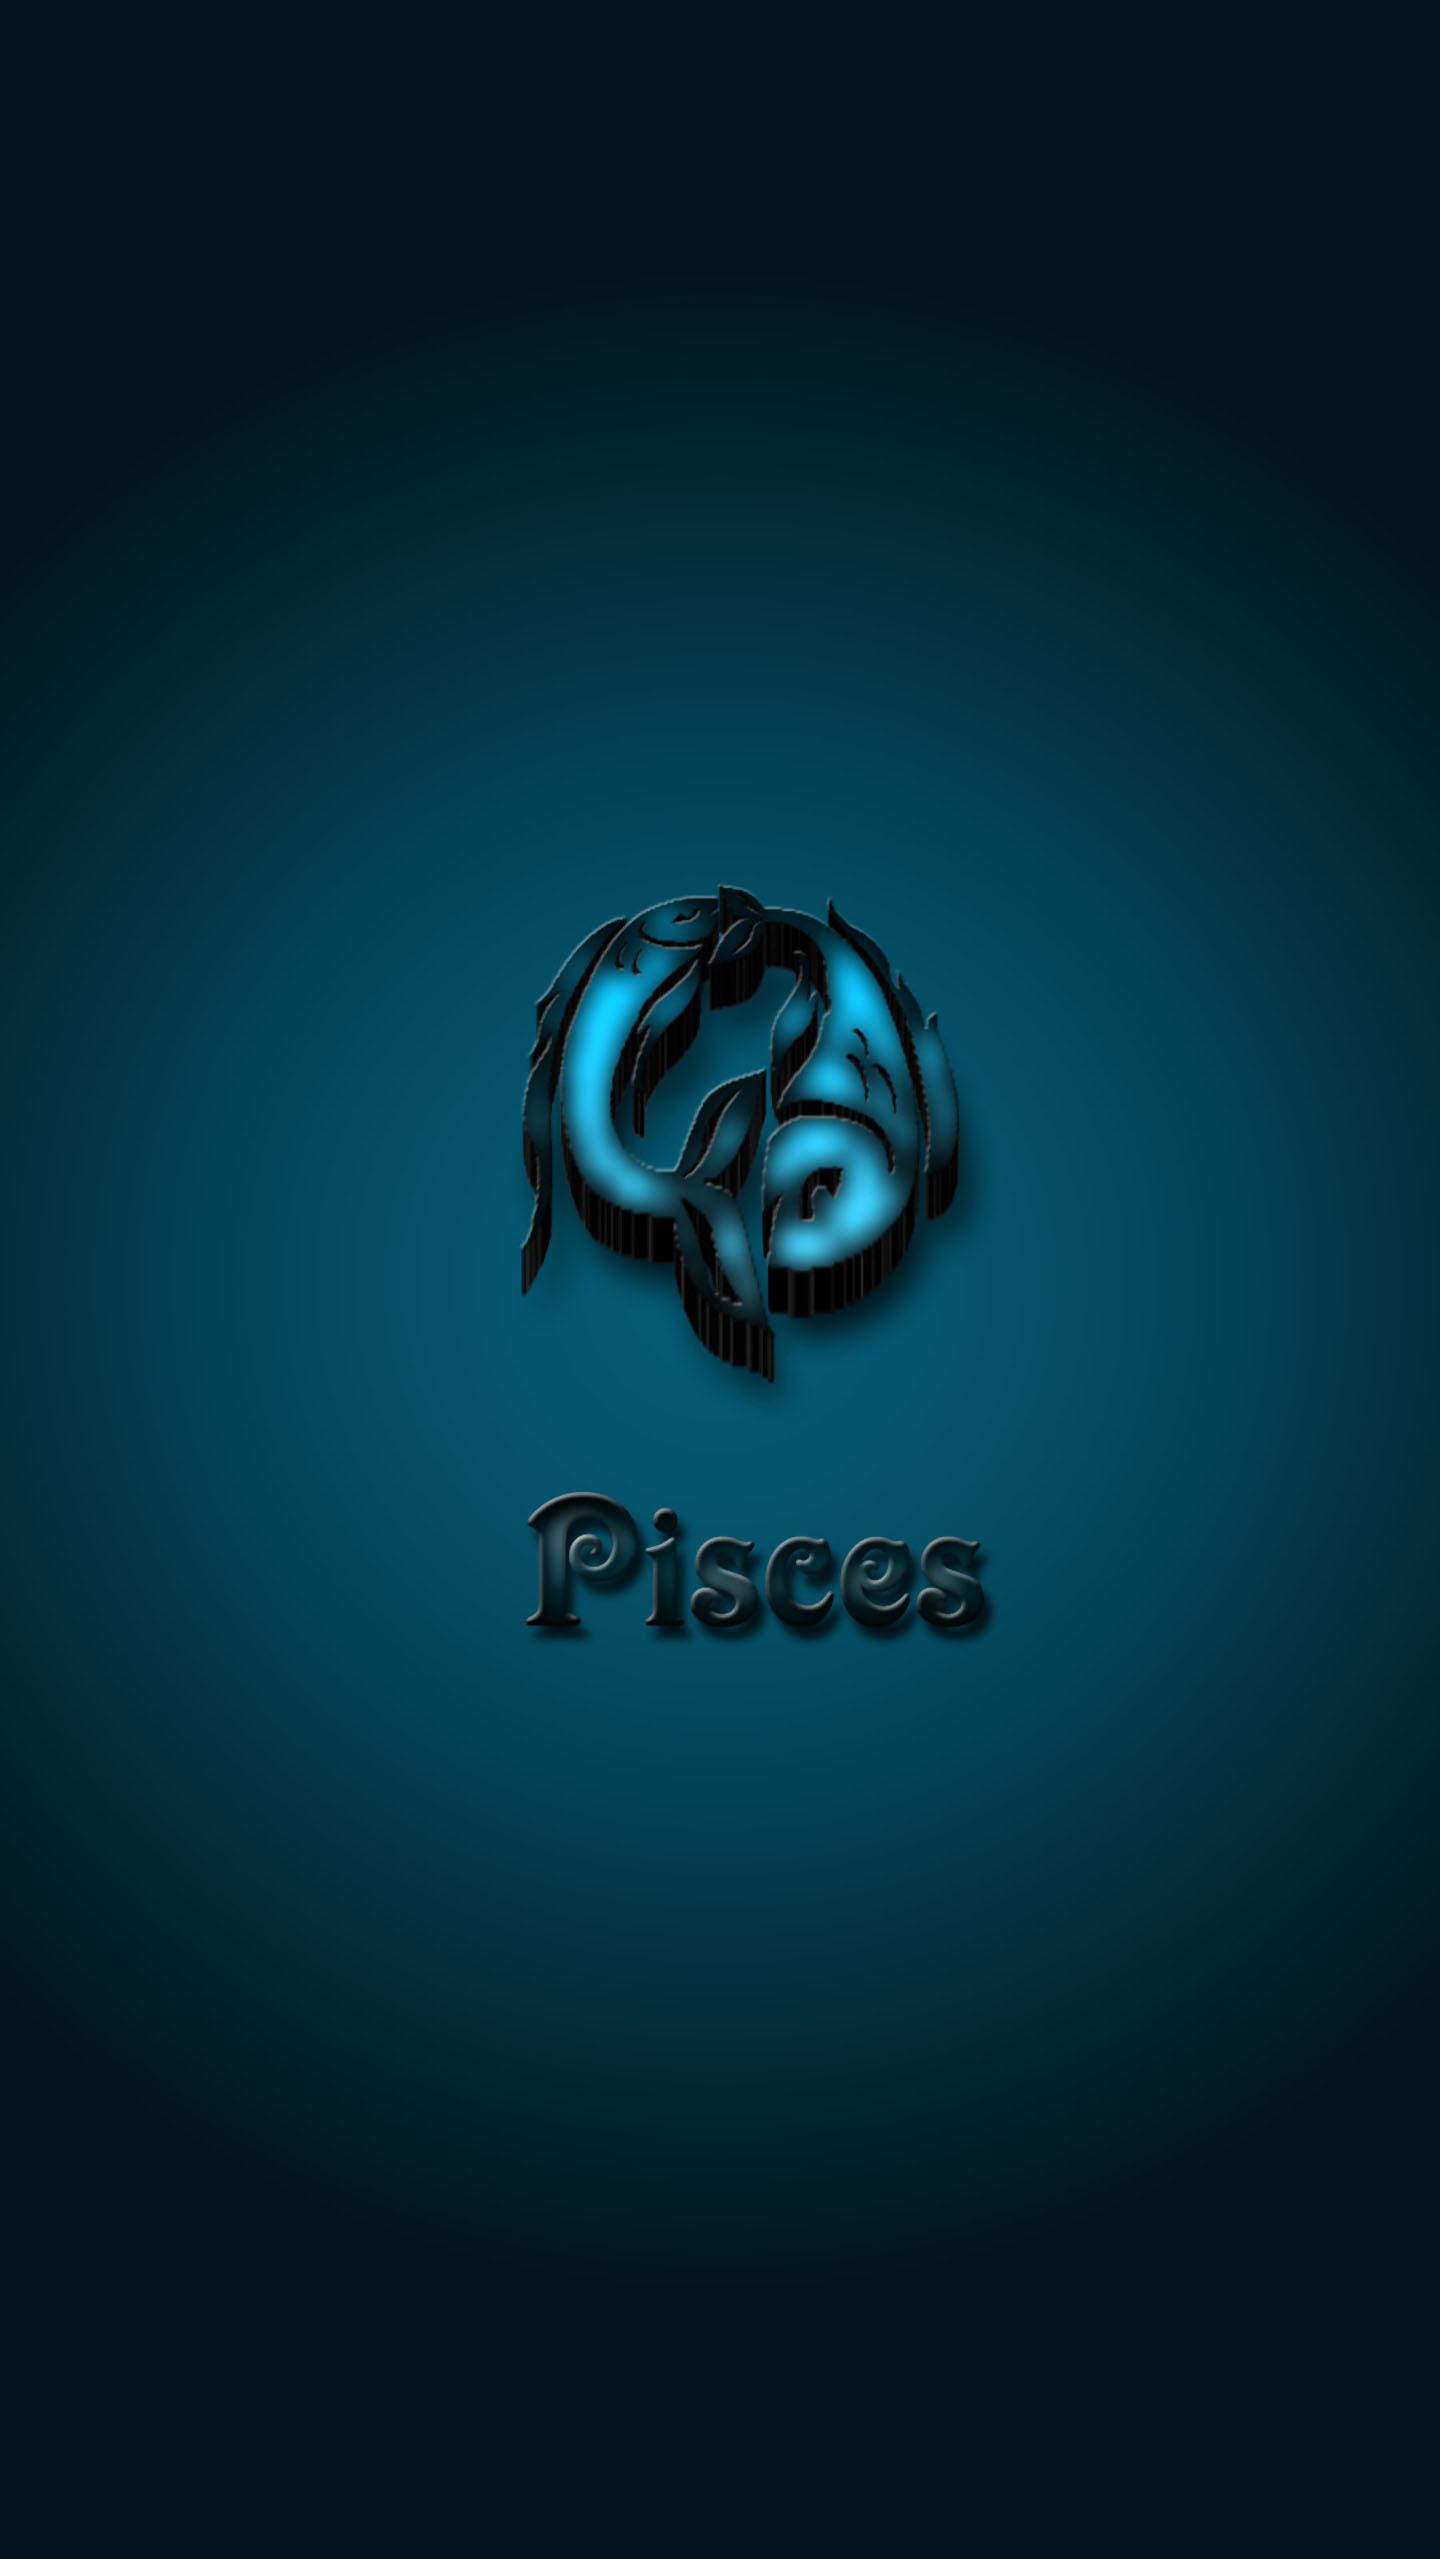 Pisces Wallpaper HD Posted By Michelle Cunningham